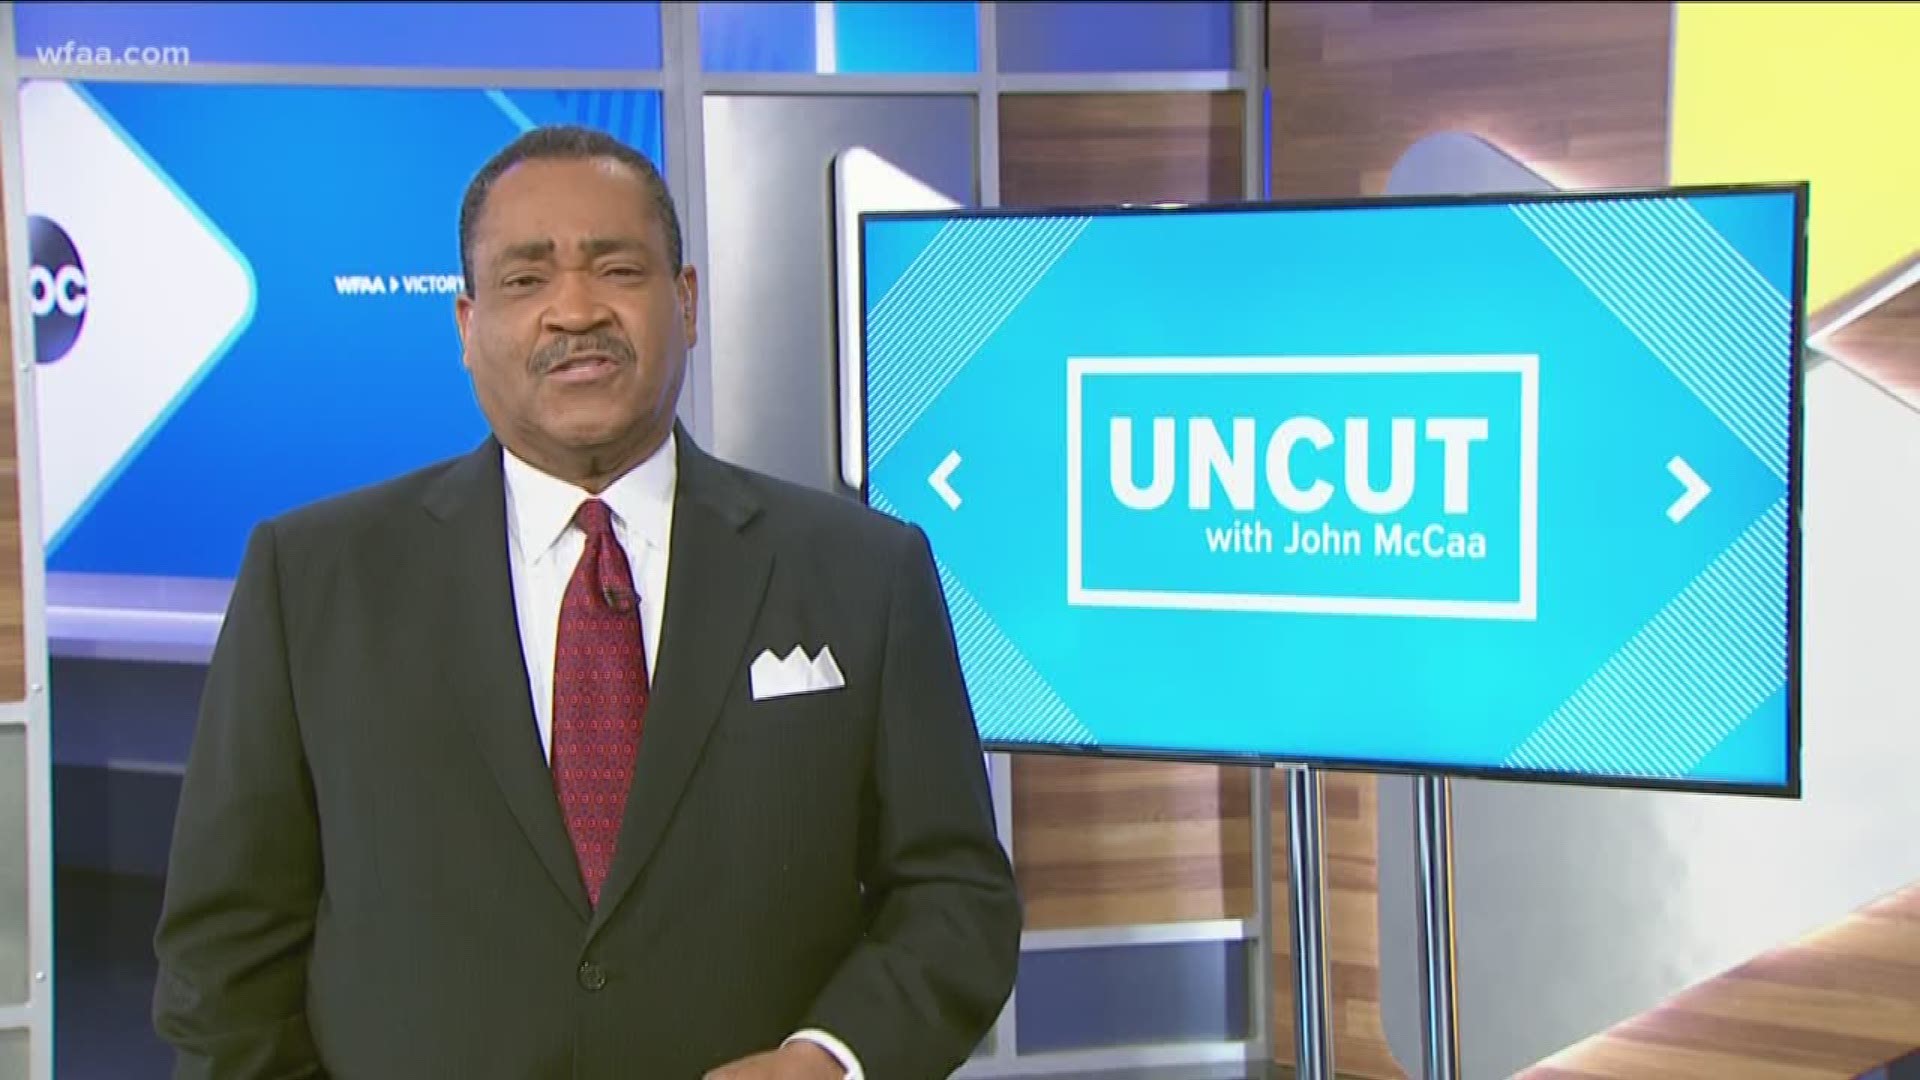 As John McCaa gives his last "Uncut" commentary, he looks to our future–our children.